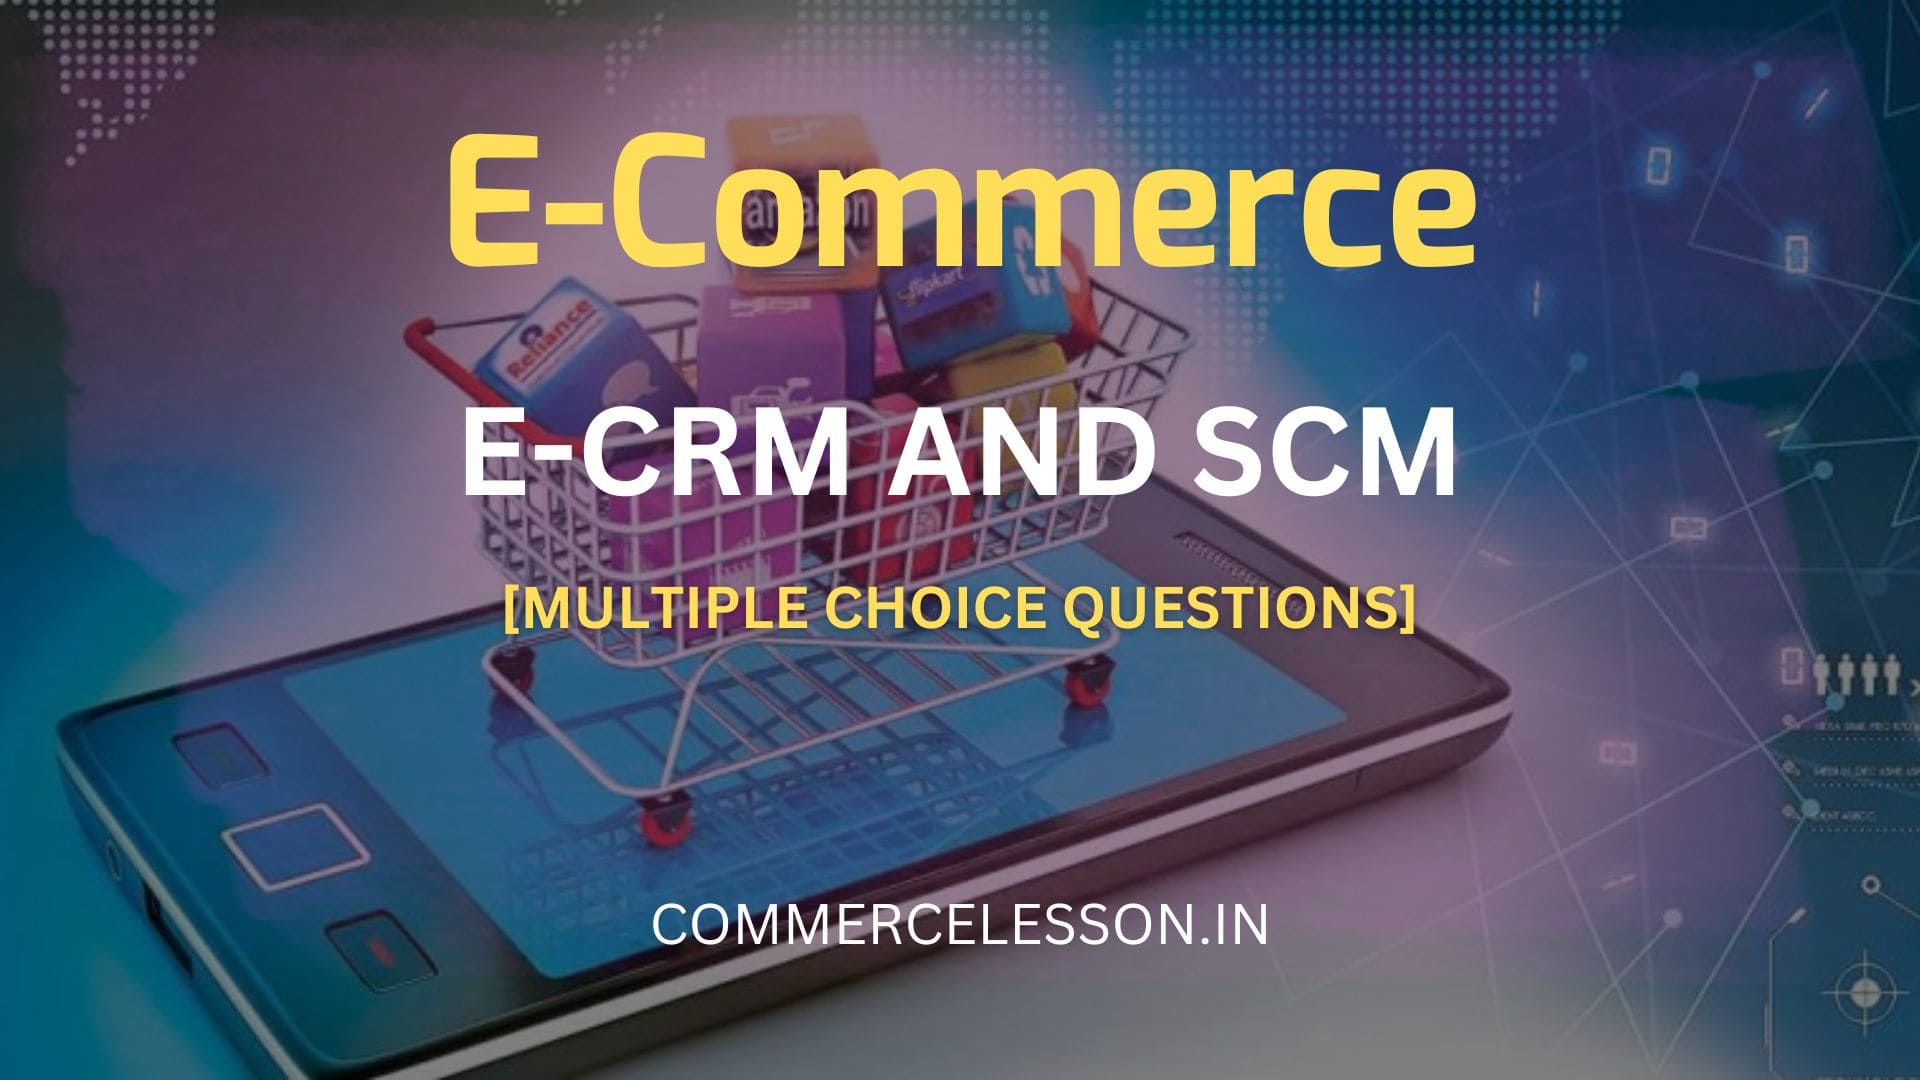 E-CRM and SCM Multiple Choice Questions